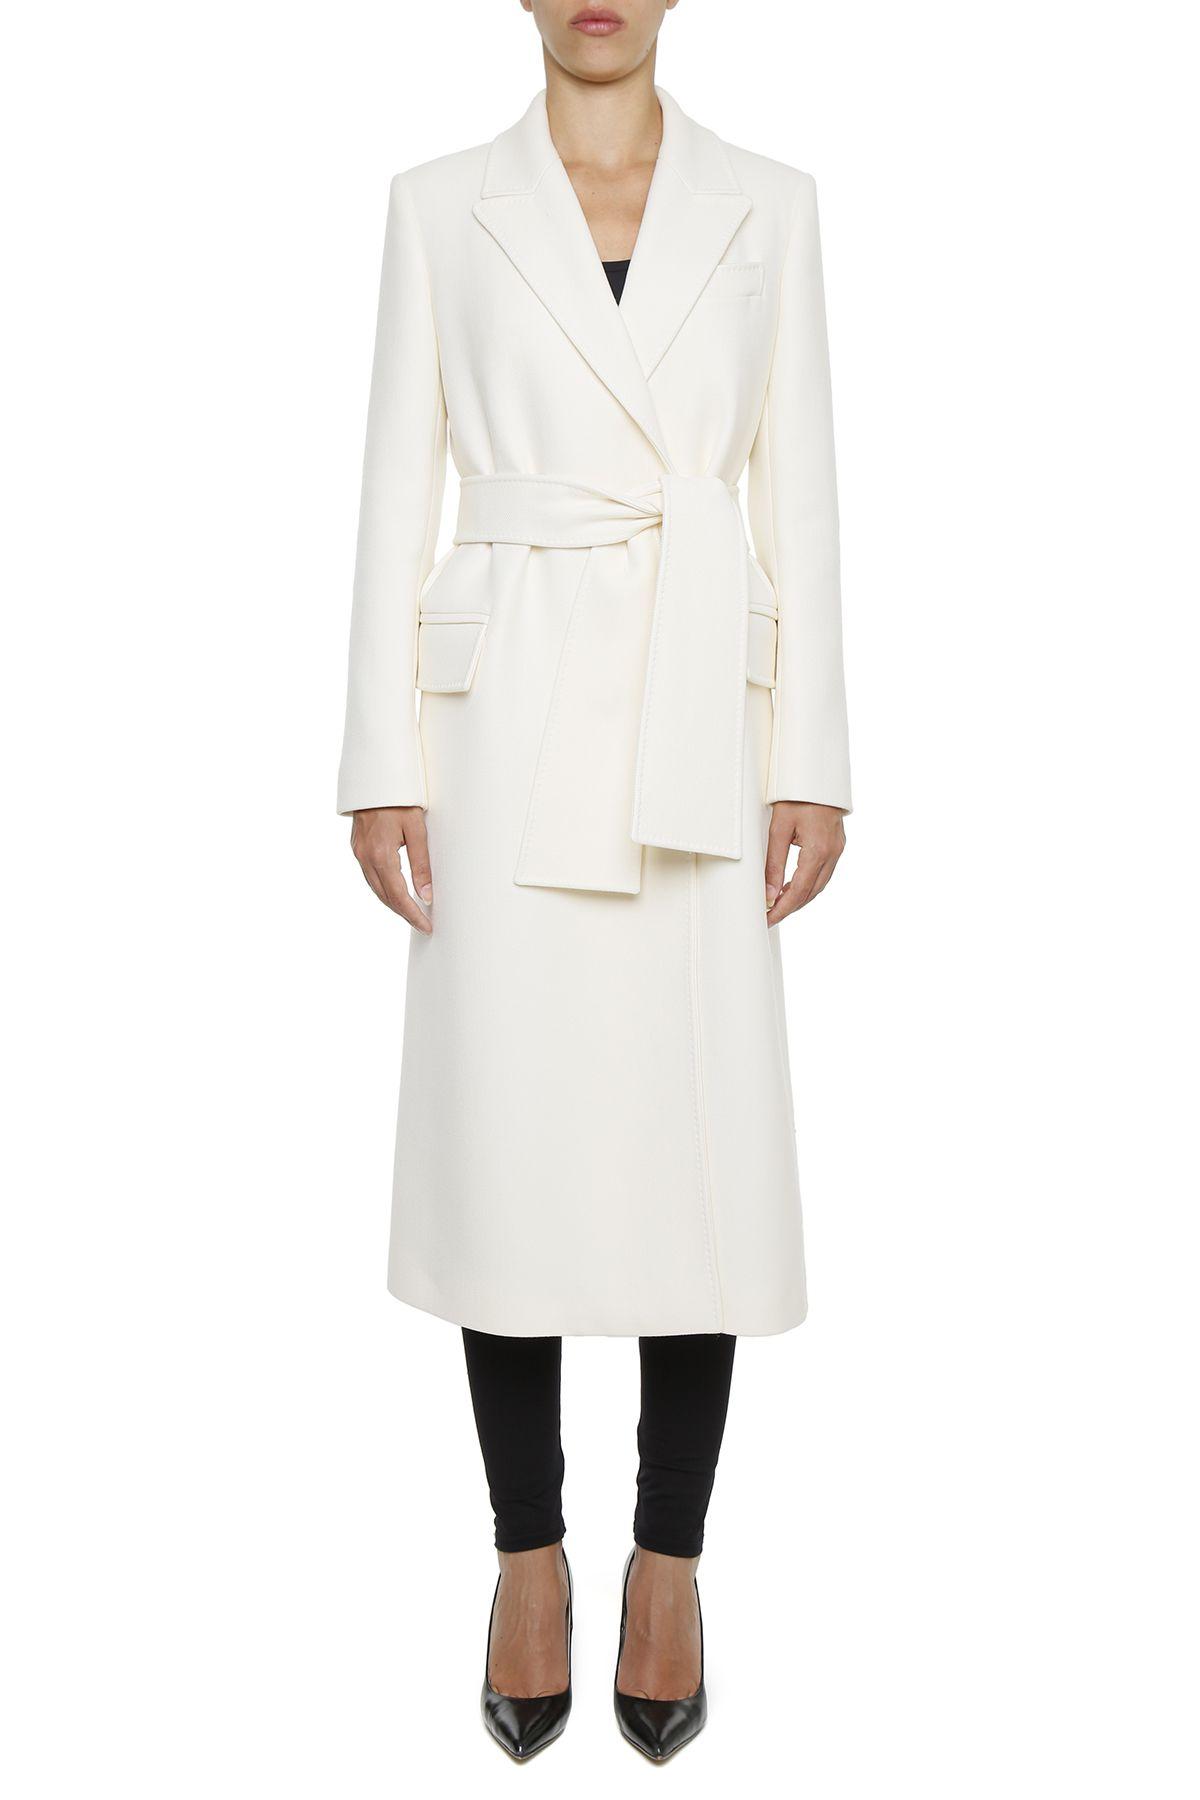 Tom Ford Tailored Wool Long Coat With Belt, White In Chalkbianco | ModeSens